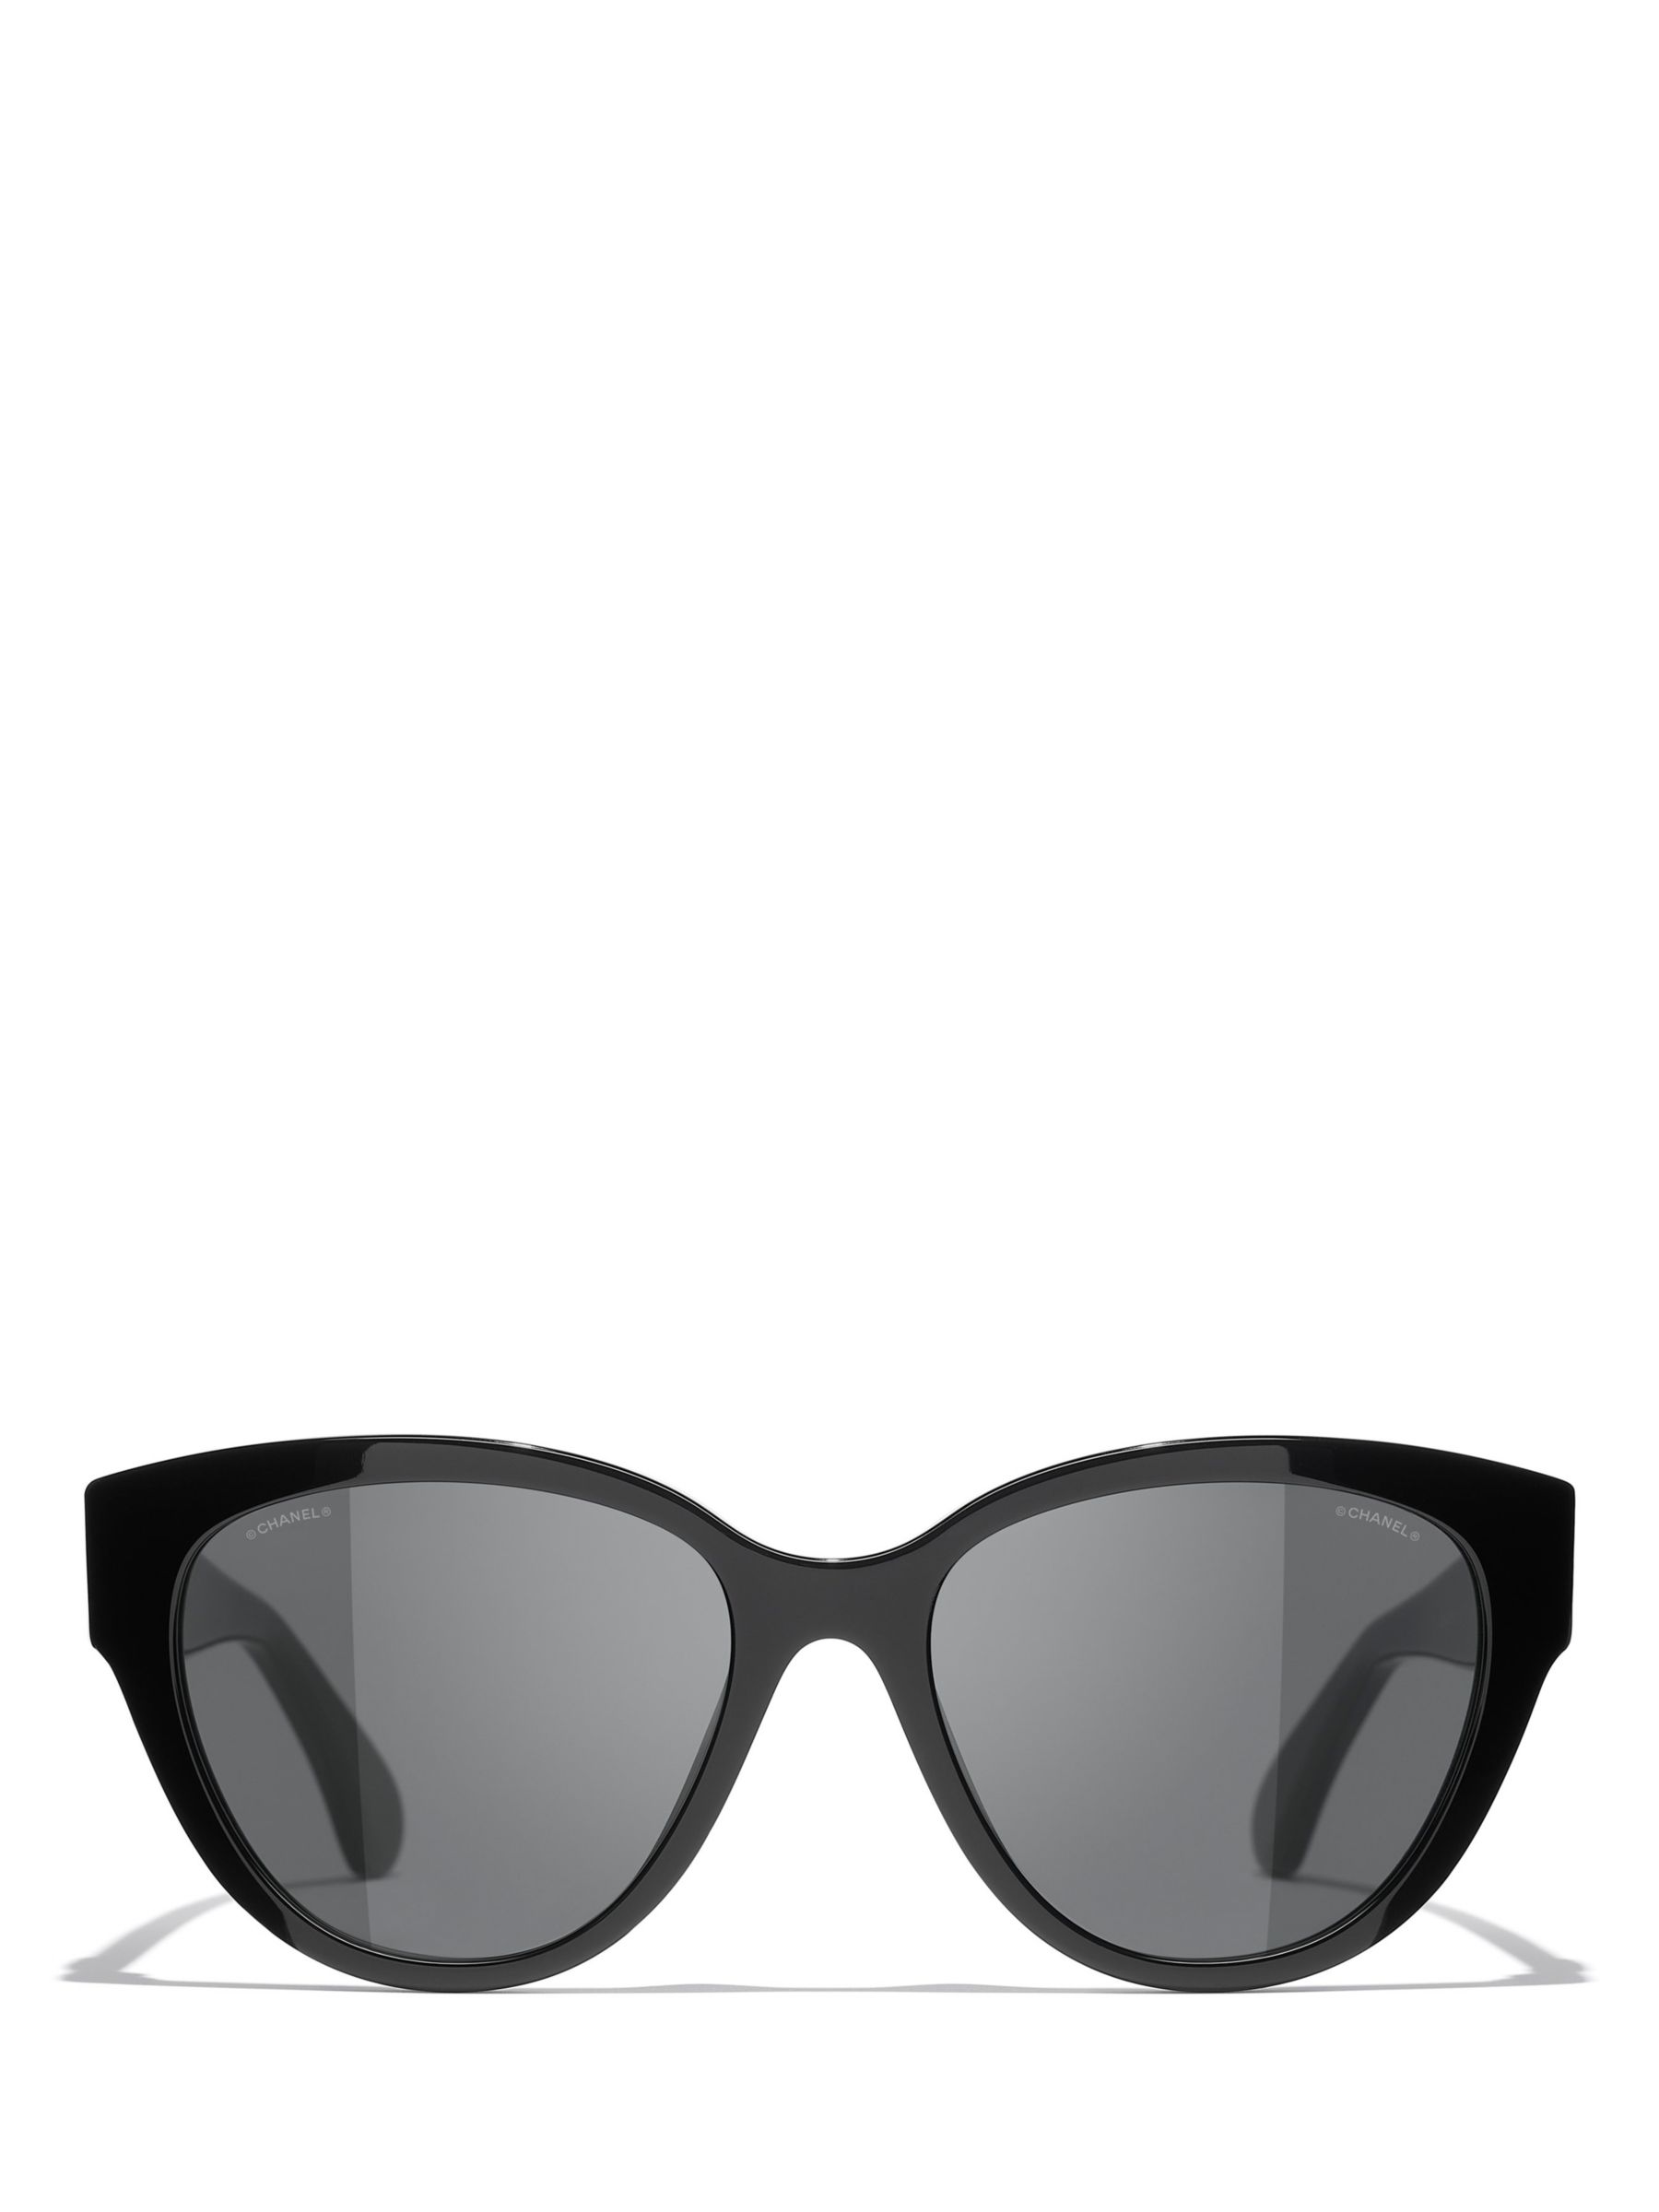 Chanel CH5477 Butterfly Sunglasses - Kaialux